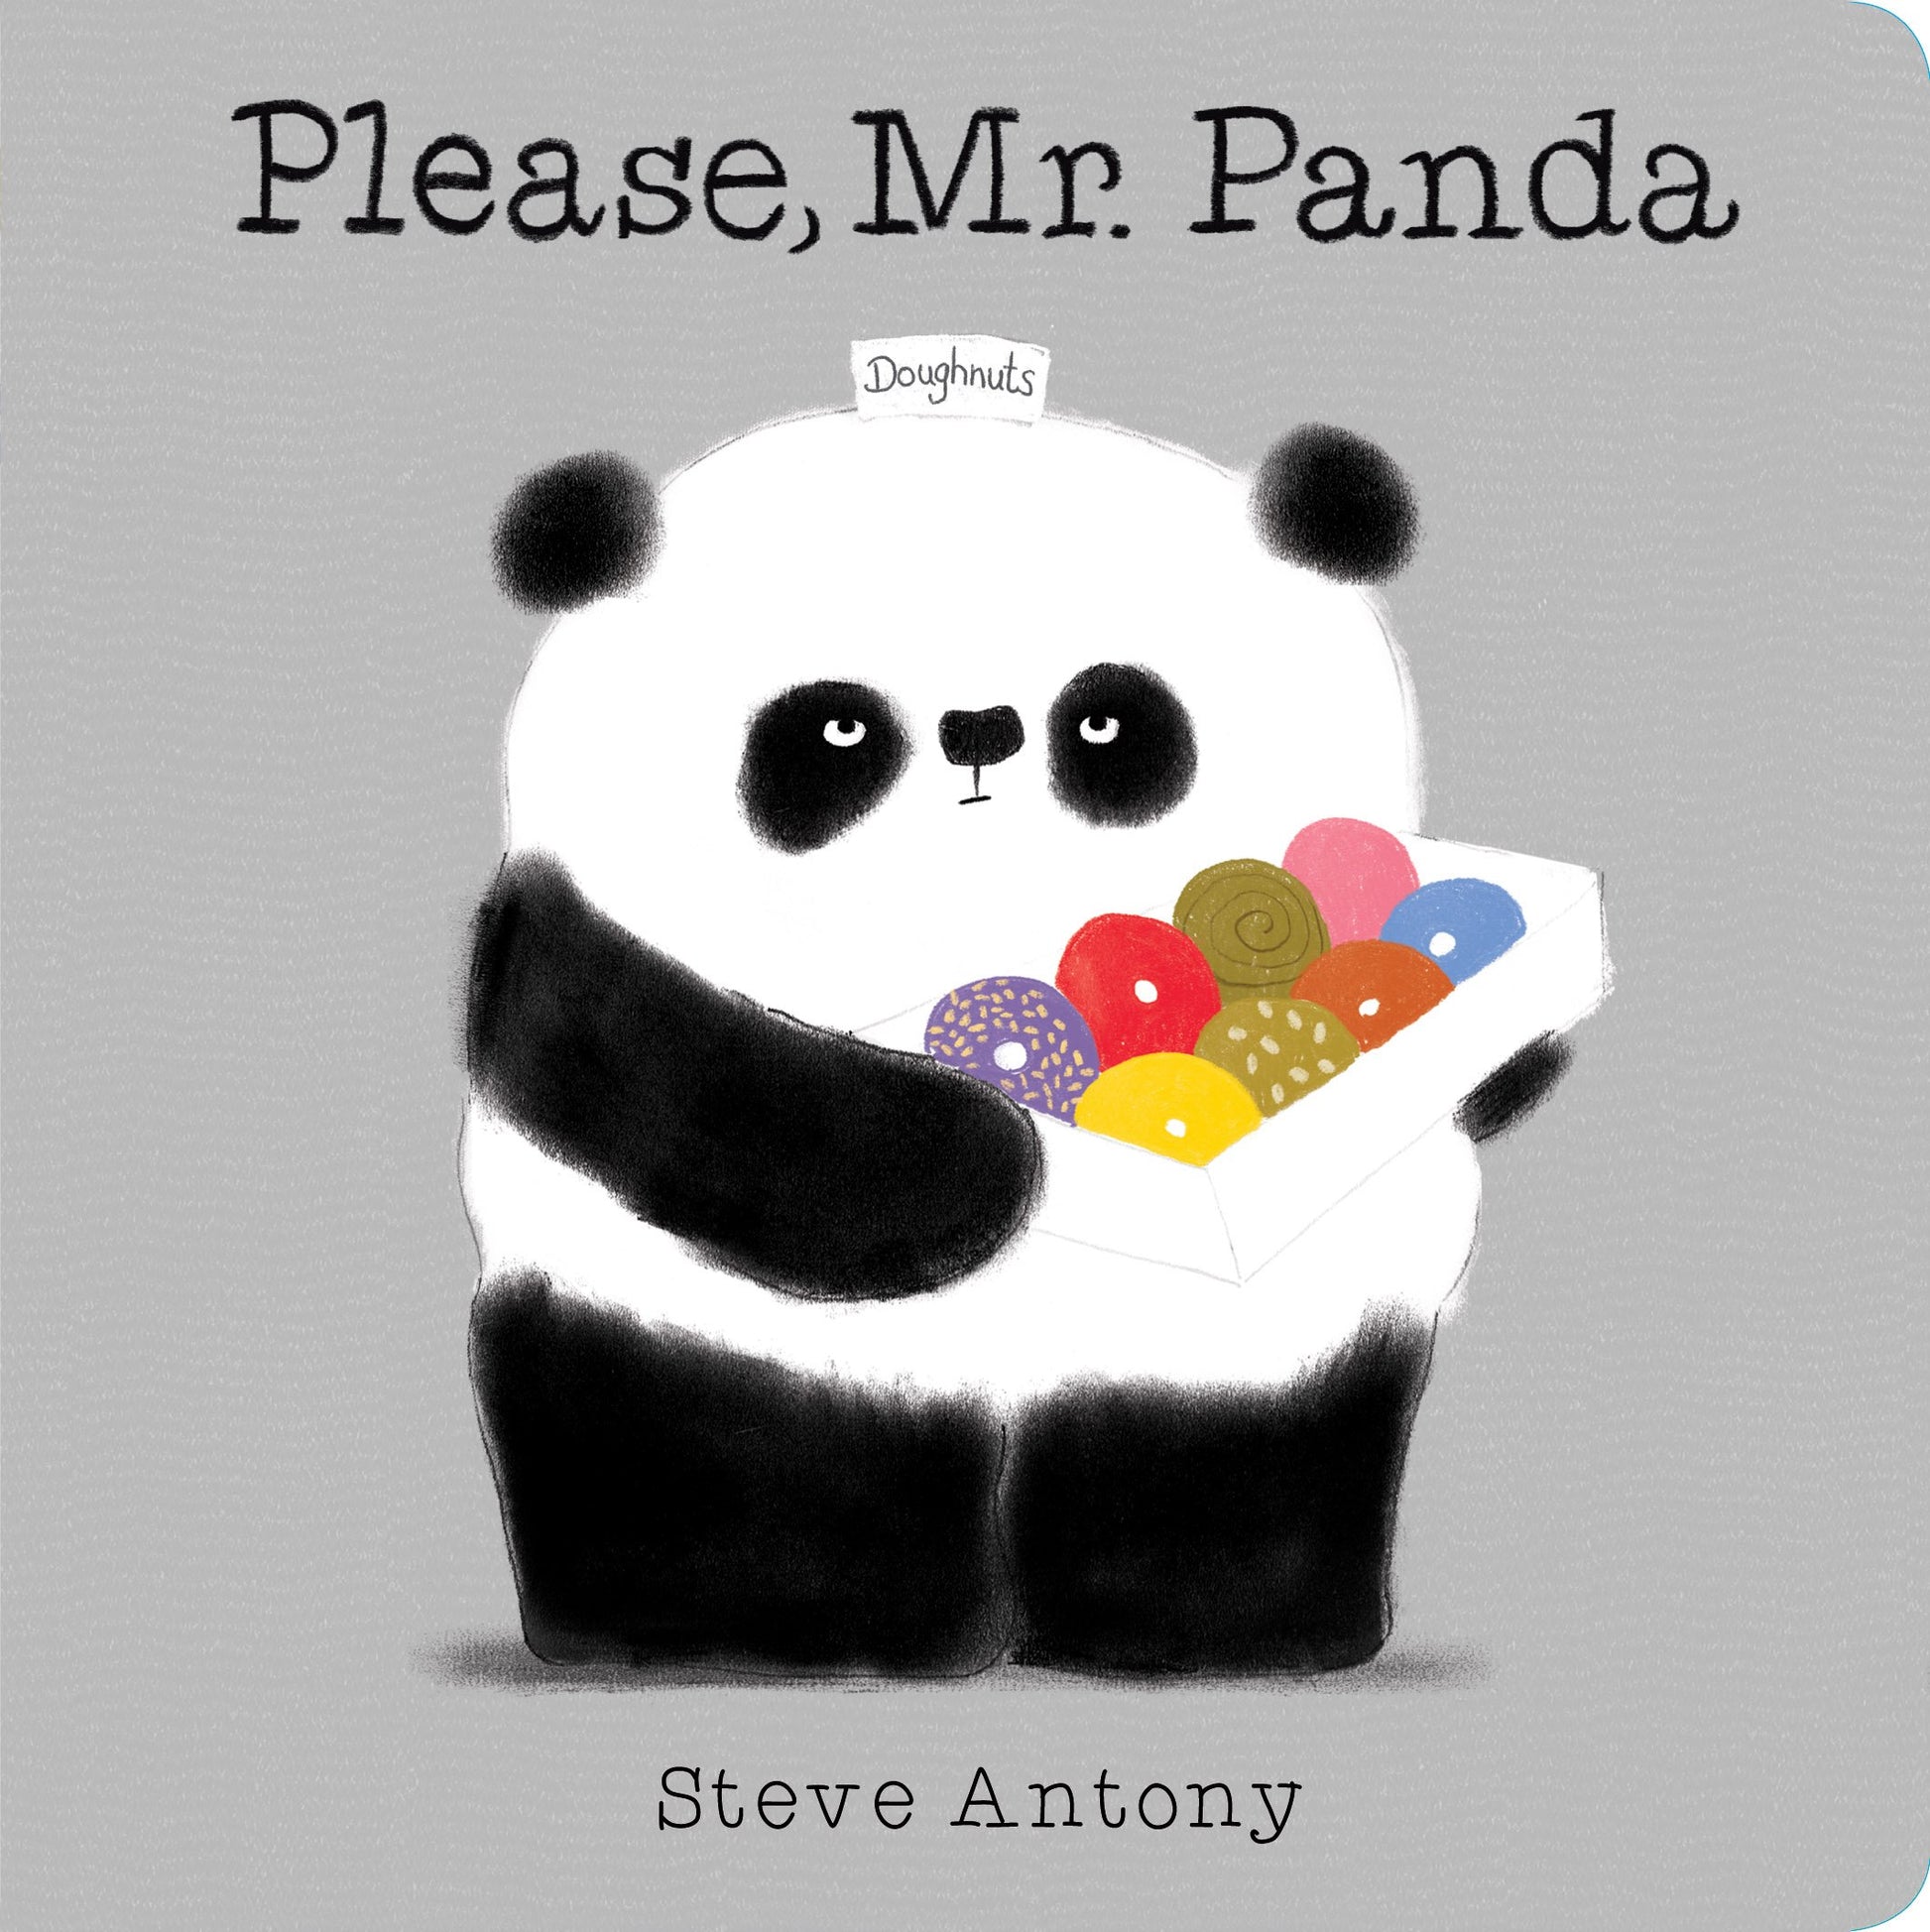 cover of book has a panda holding a box of donuts, title, and authors name